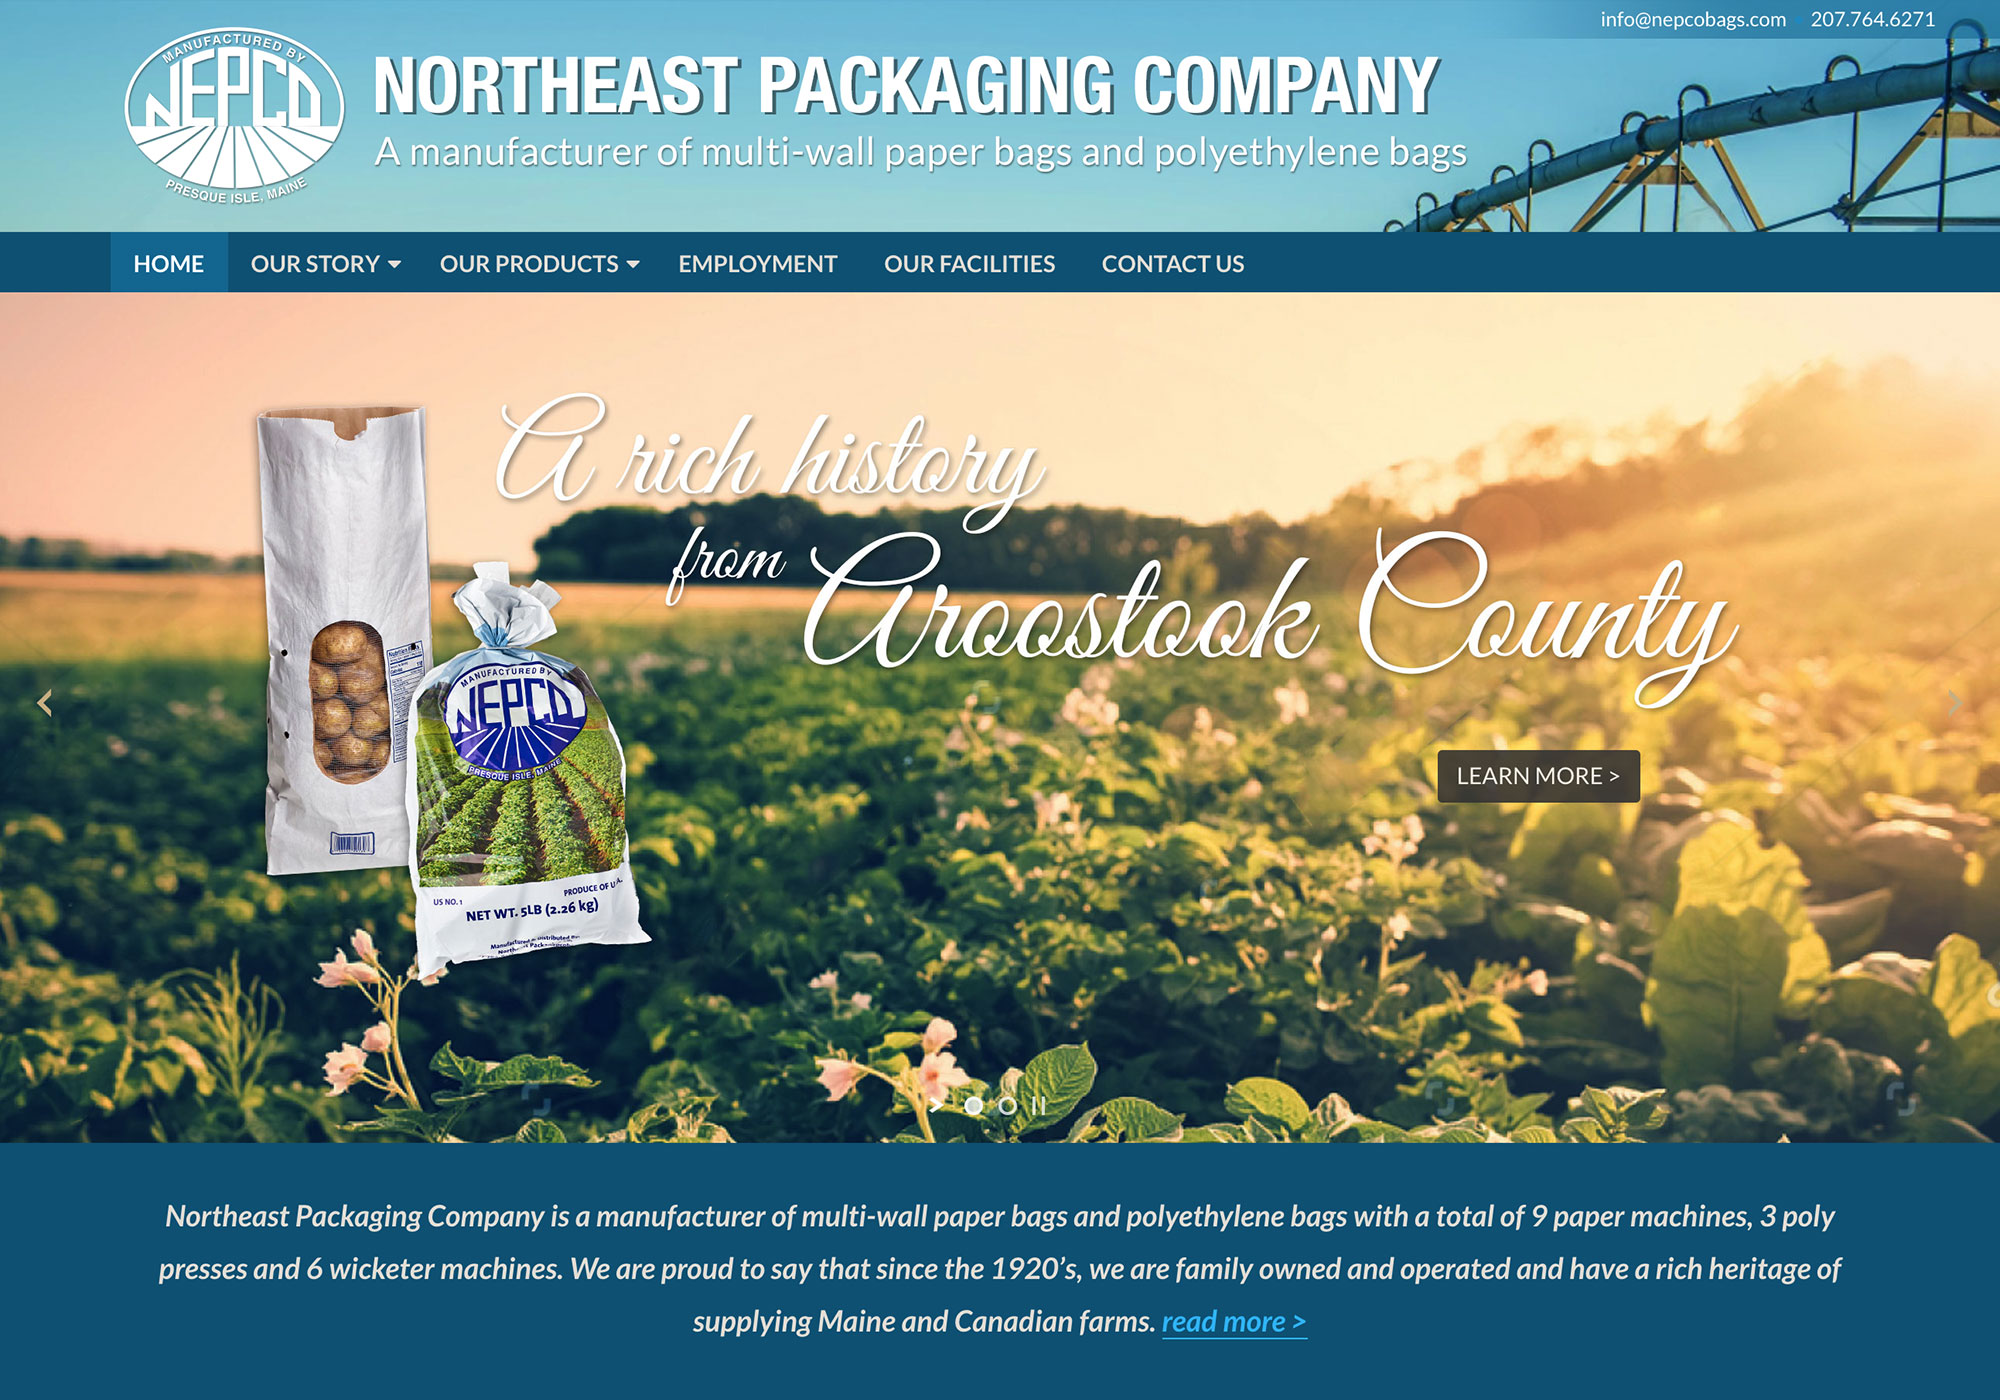 A screenshot of the homepage from the SlickFish Studios designed and developed website for Northeast Packaging Company.